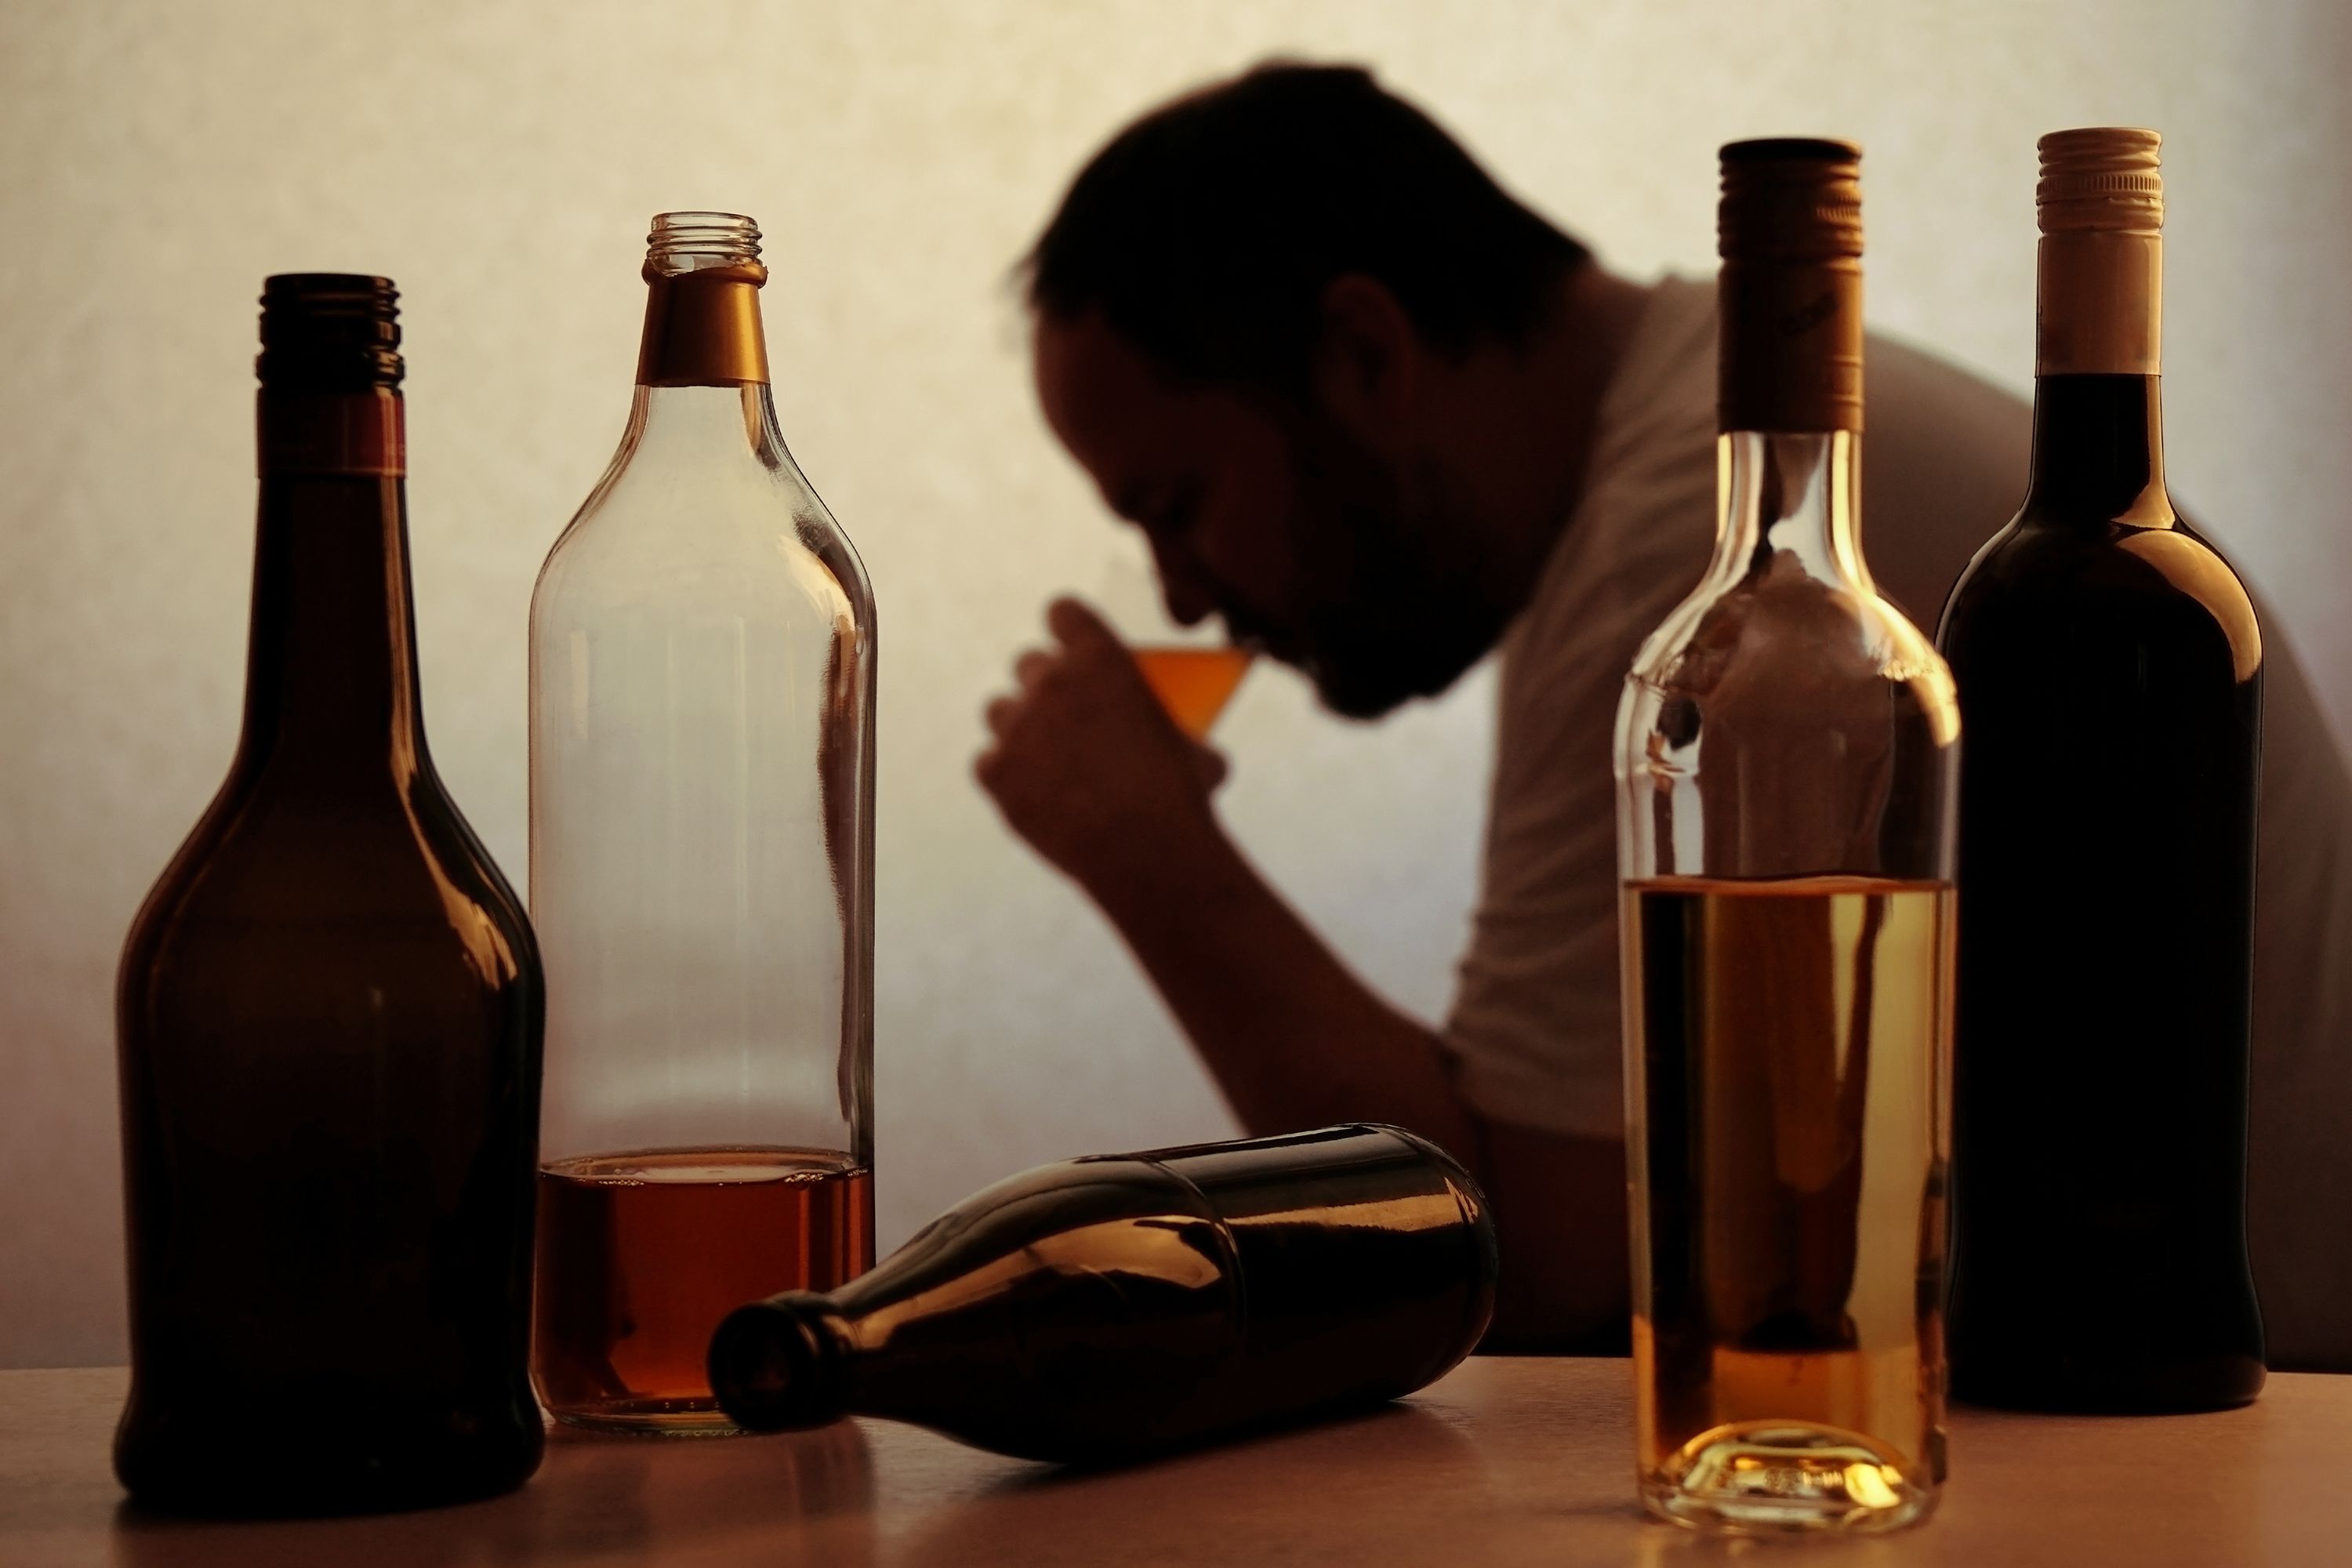 1 in 5 deaths of US adults 20 to 49 is from excessive drinking, study shows  | CNN